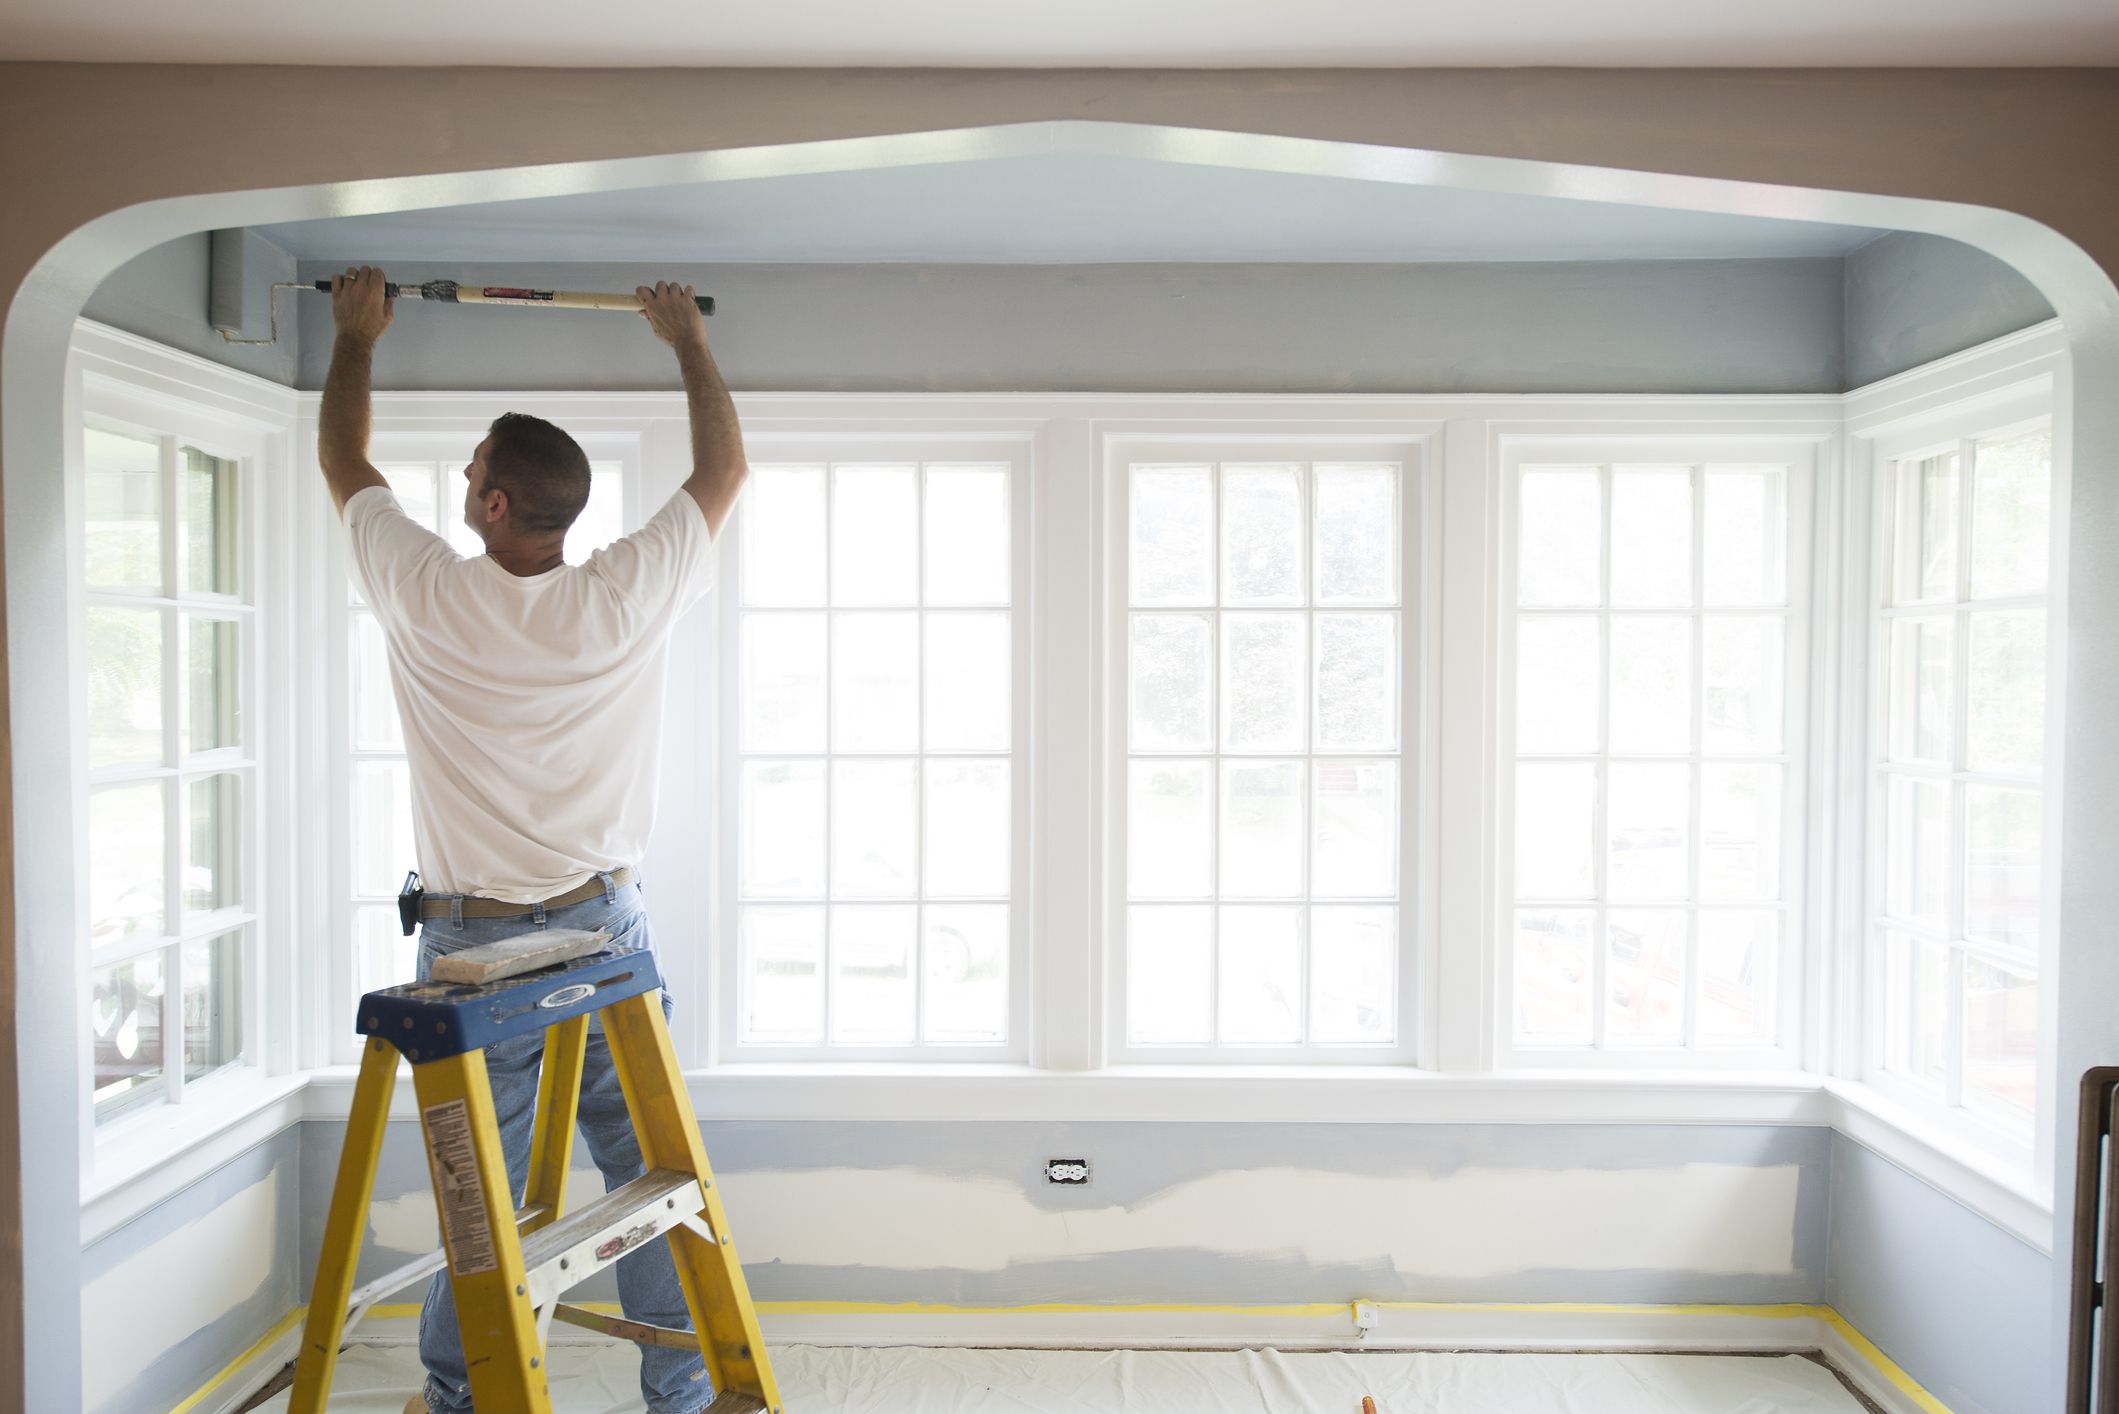 Do You Paint Ceiling Or Walls First - img-befuddle